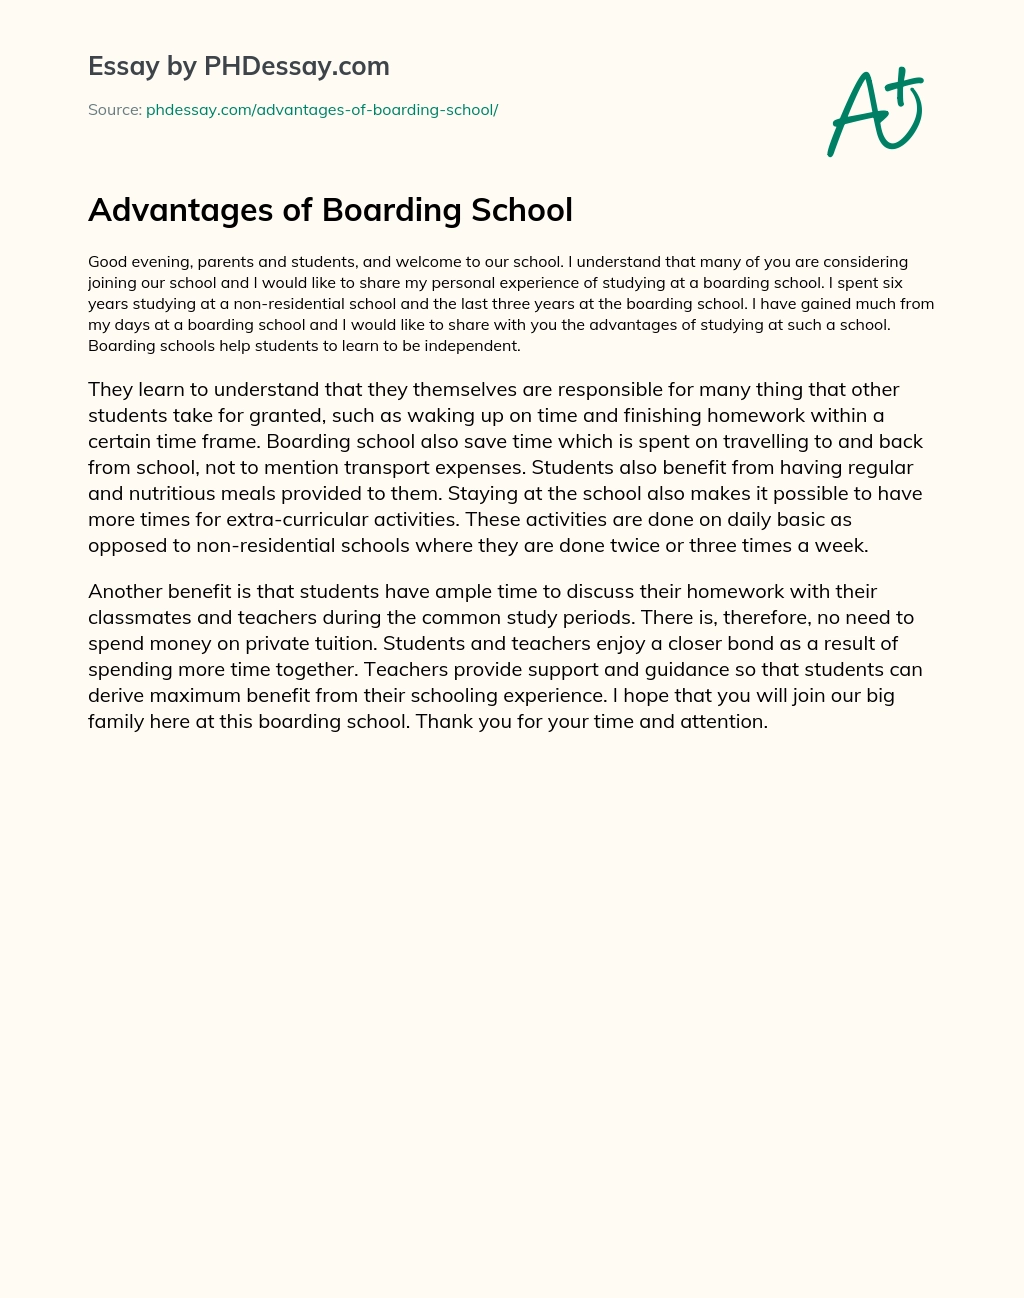 pros and cons of boarding school essay